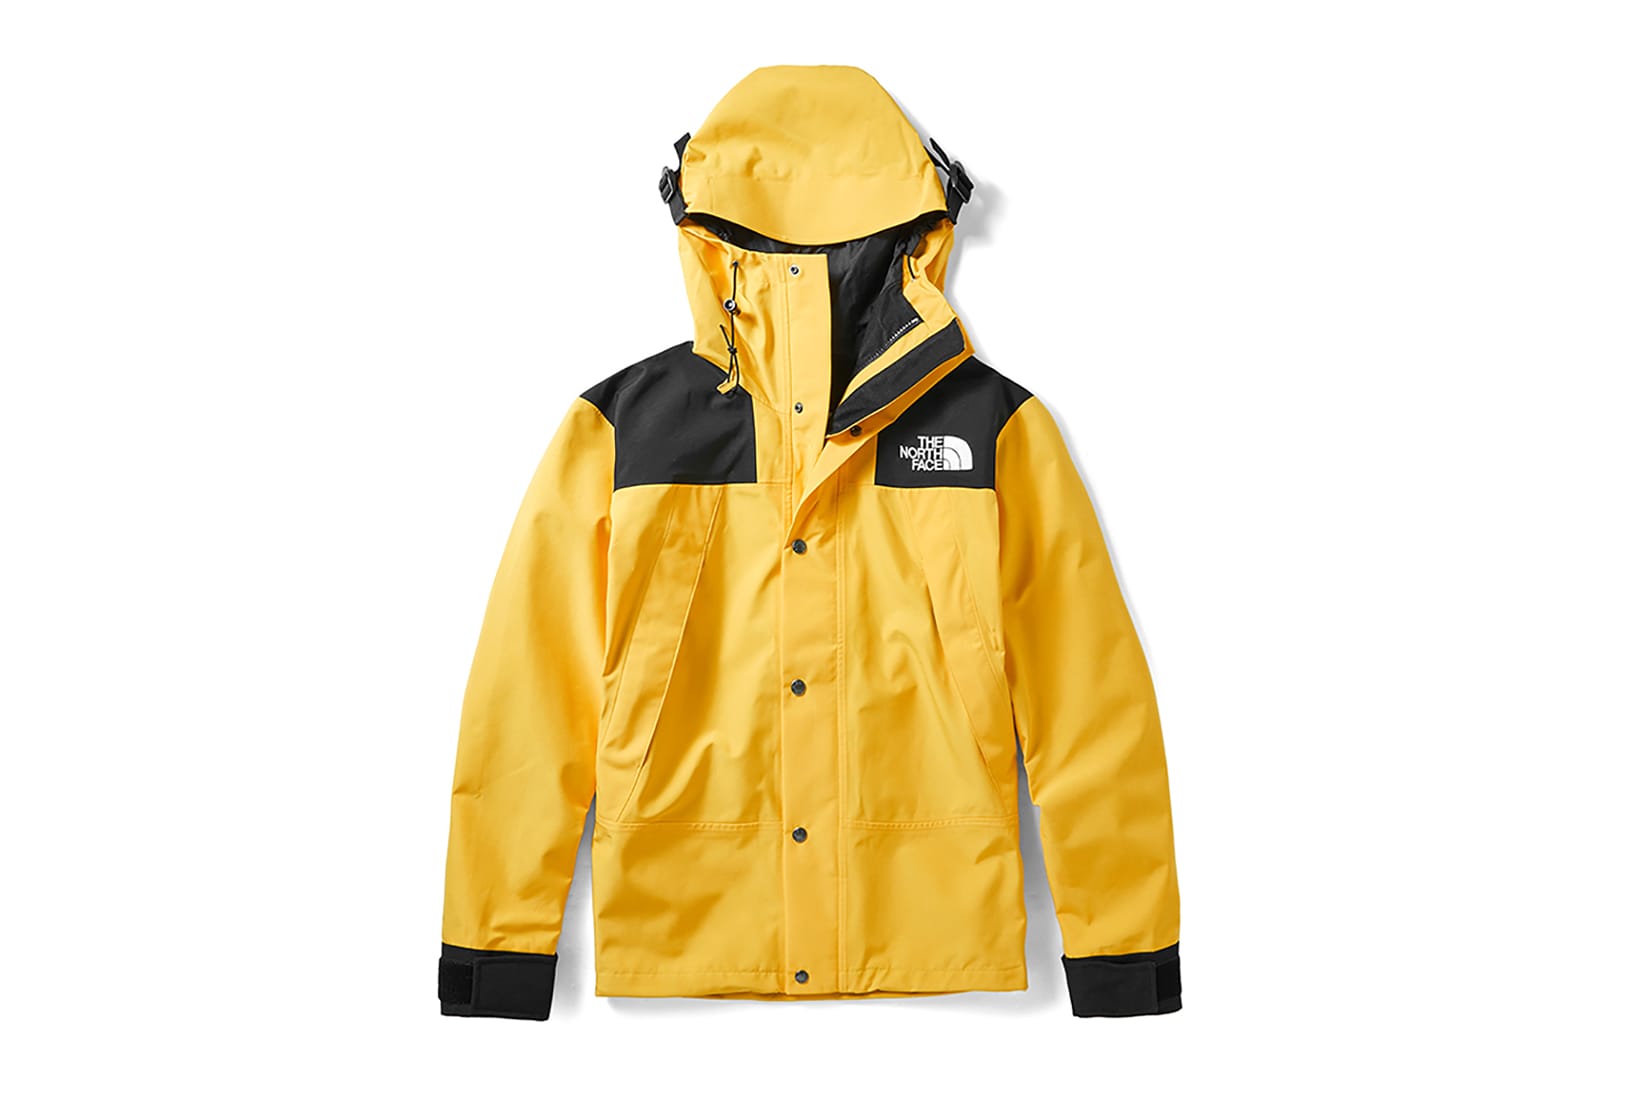 north face women's hiking jacket